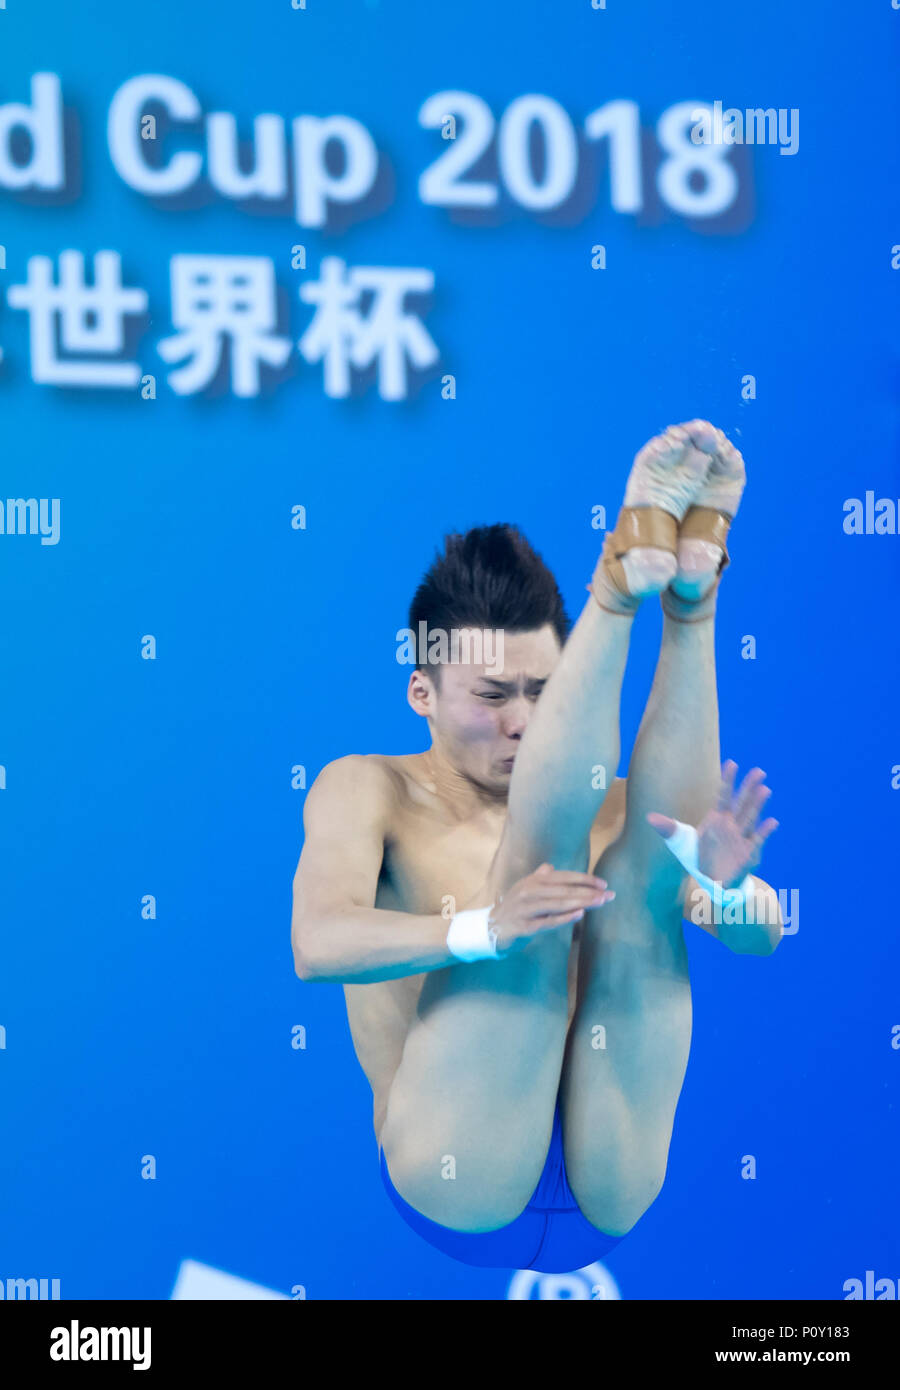 Wuhan. 10th June, 2018. Chen Aisen of China competes during the men's 10m platform final at the FINA Diving World Cup 2018 in Wuhan, central China's Hubei Province on June 10, 2018. Chen claimed the title with a total of 557.80 points. Credit: Xiong Qi/Xinhua/Alamy Live News Stock Photo